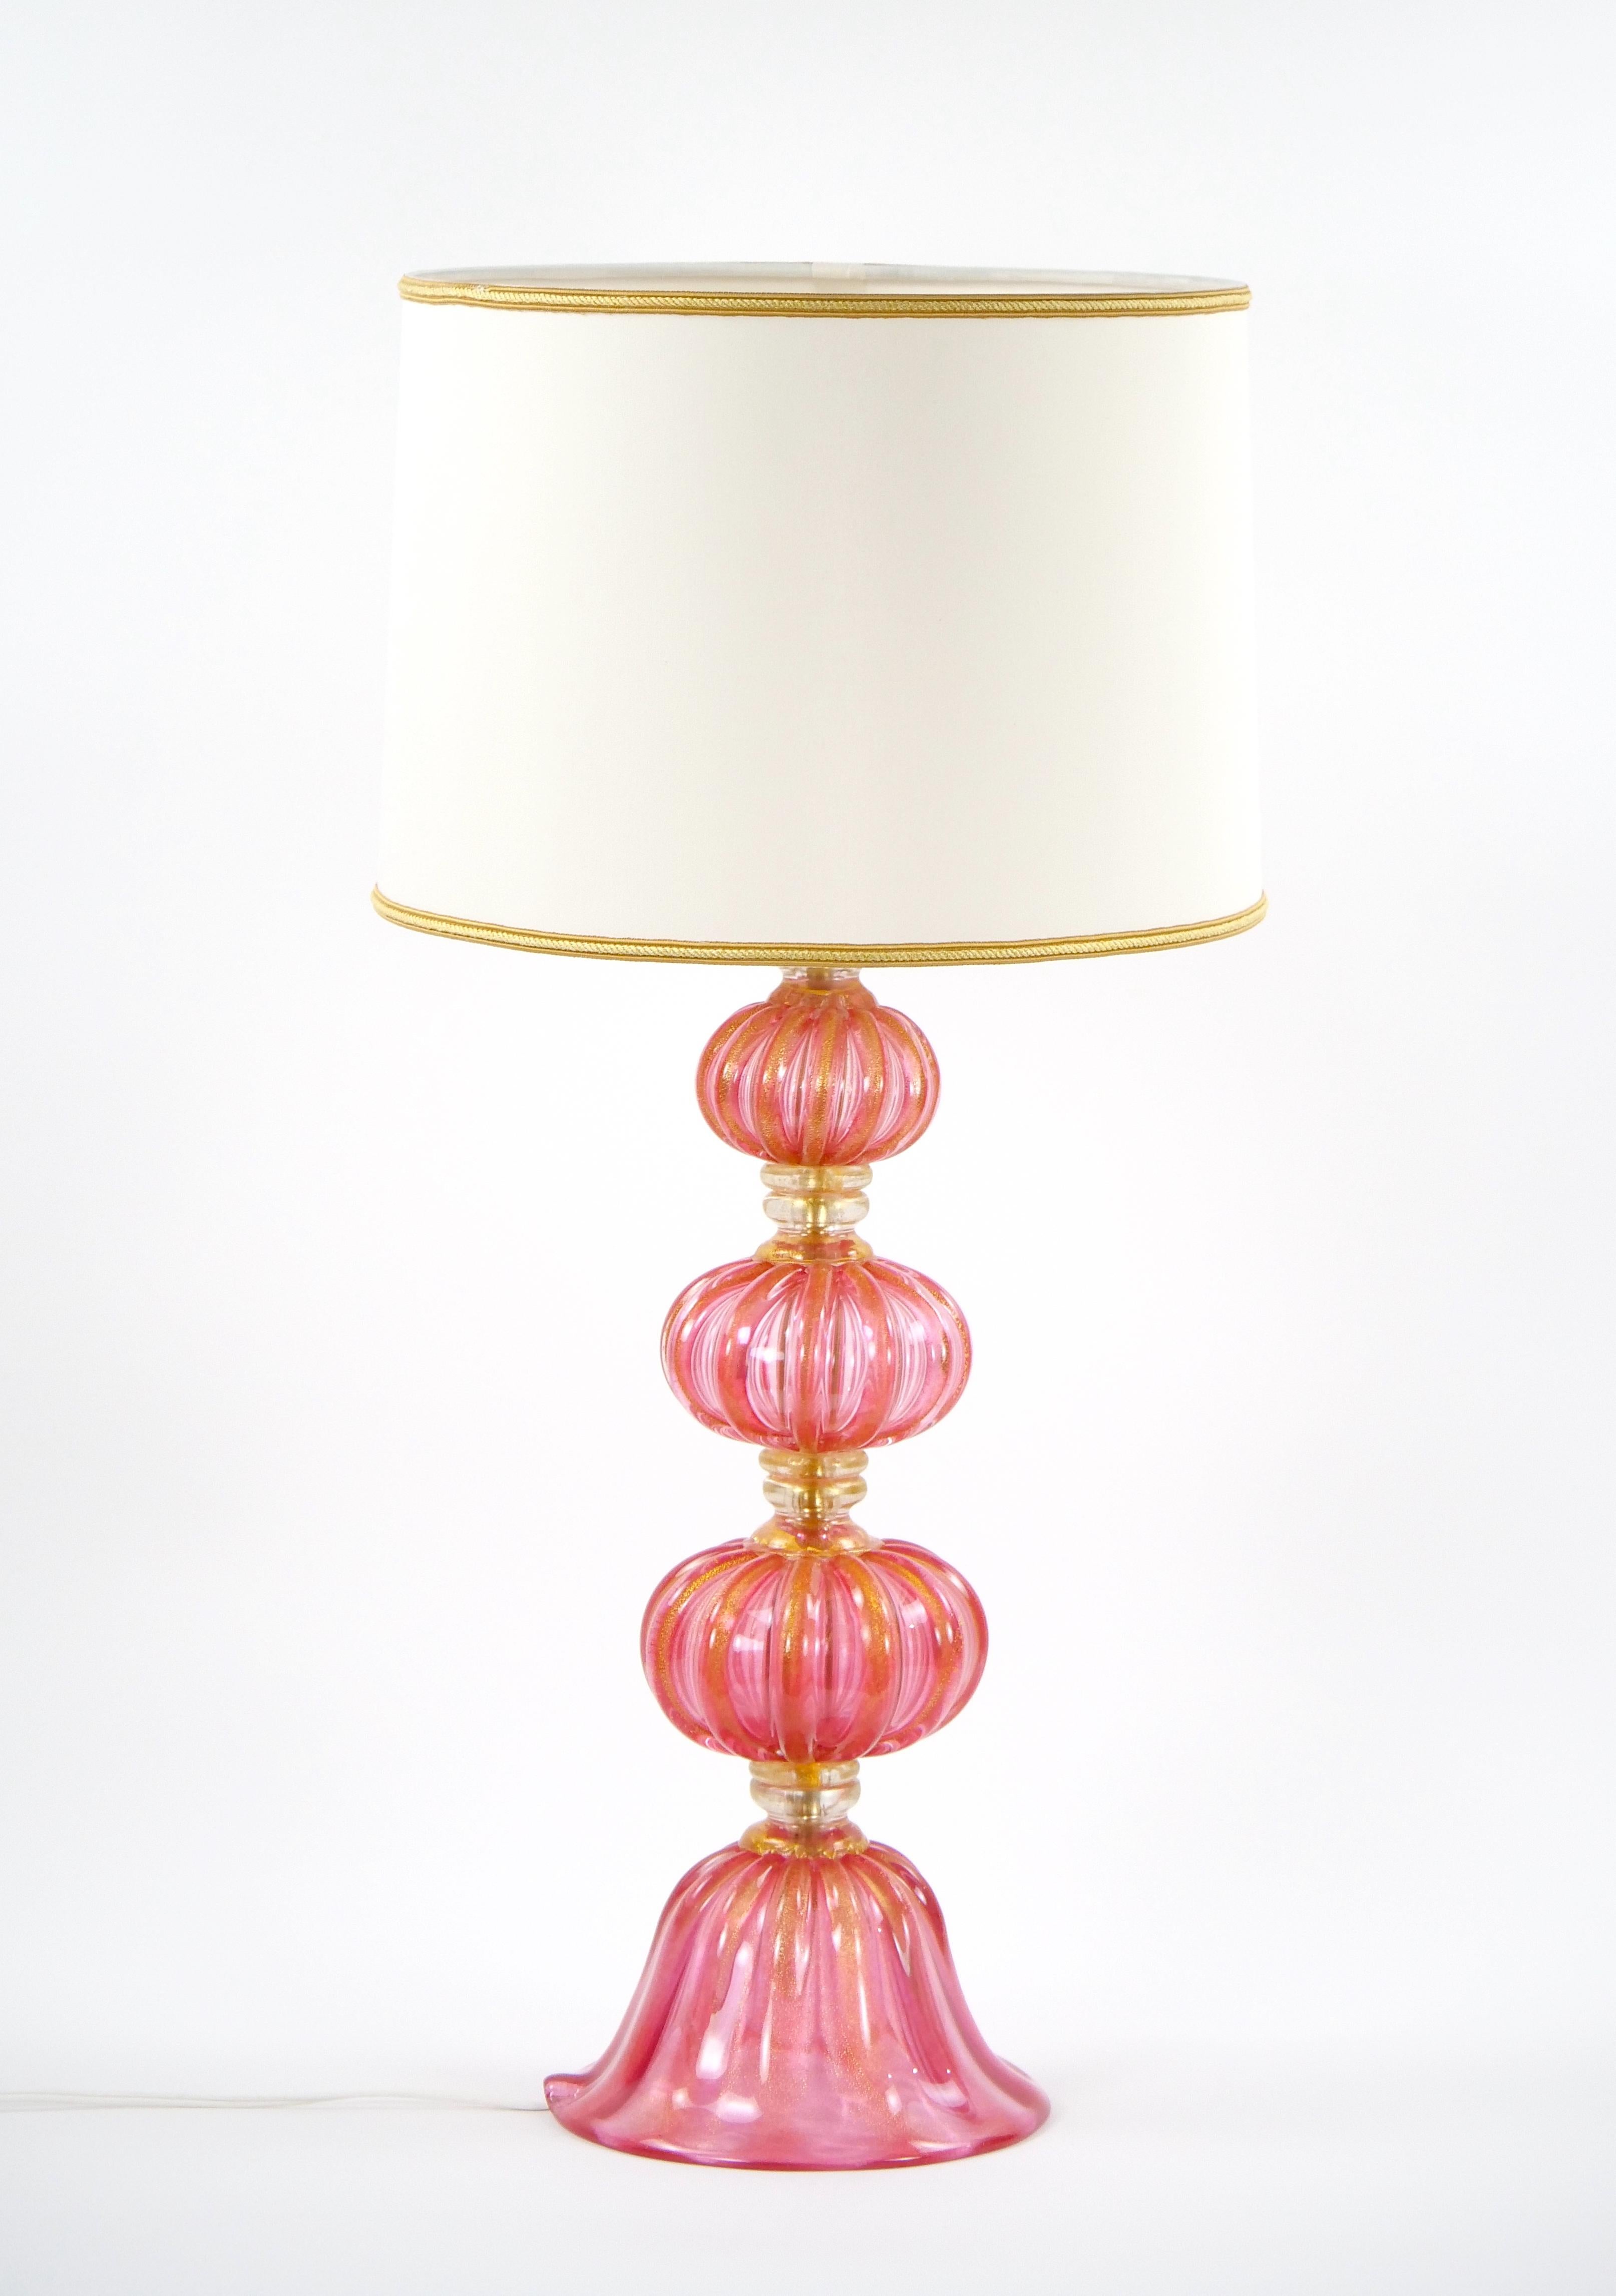 Exquisite Pair Venetian Pink Glass / Gold Flecks Table Lamps For Sale 1